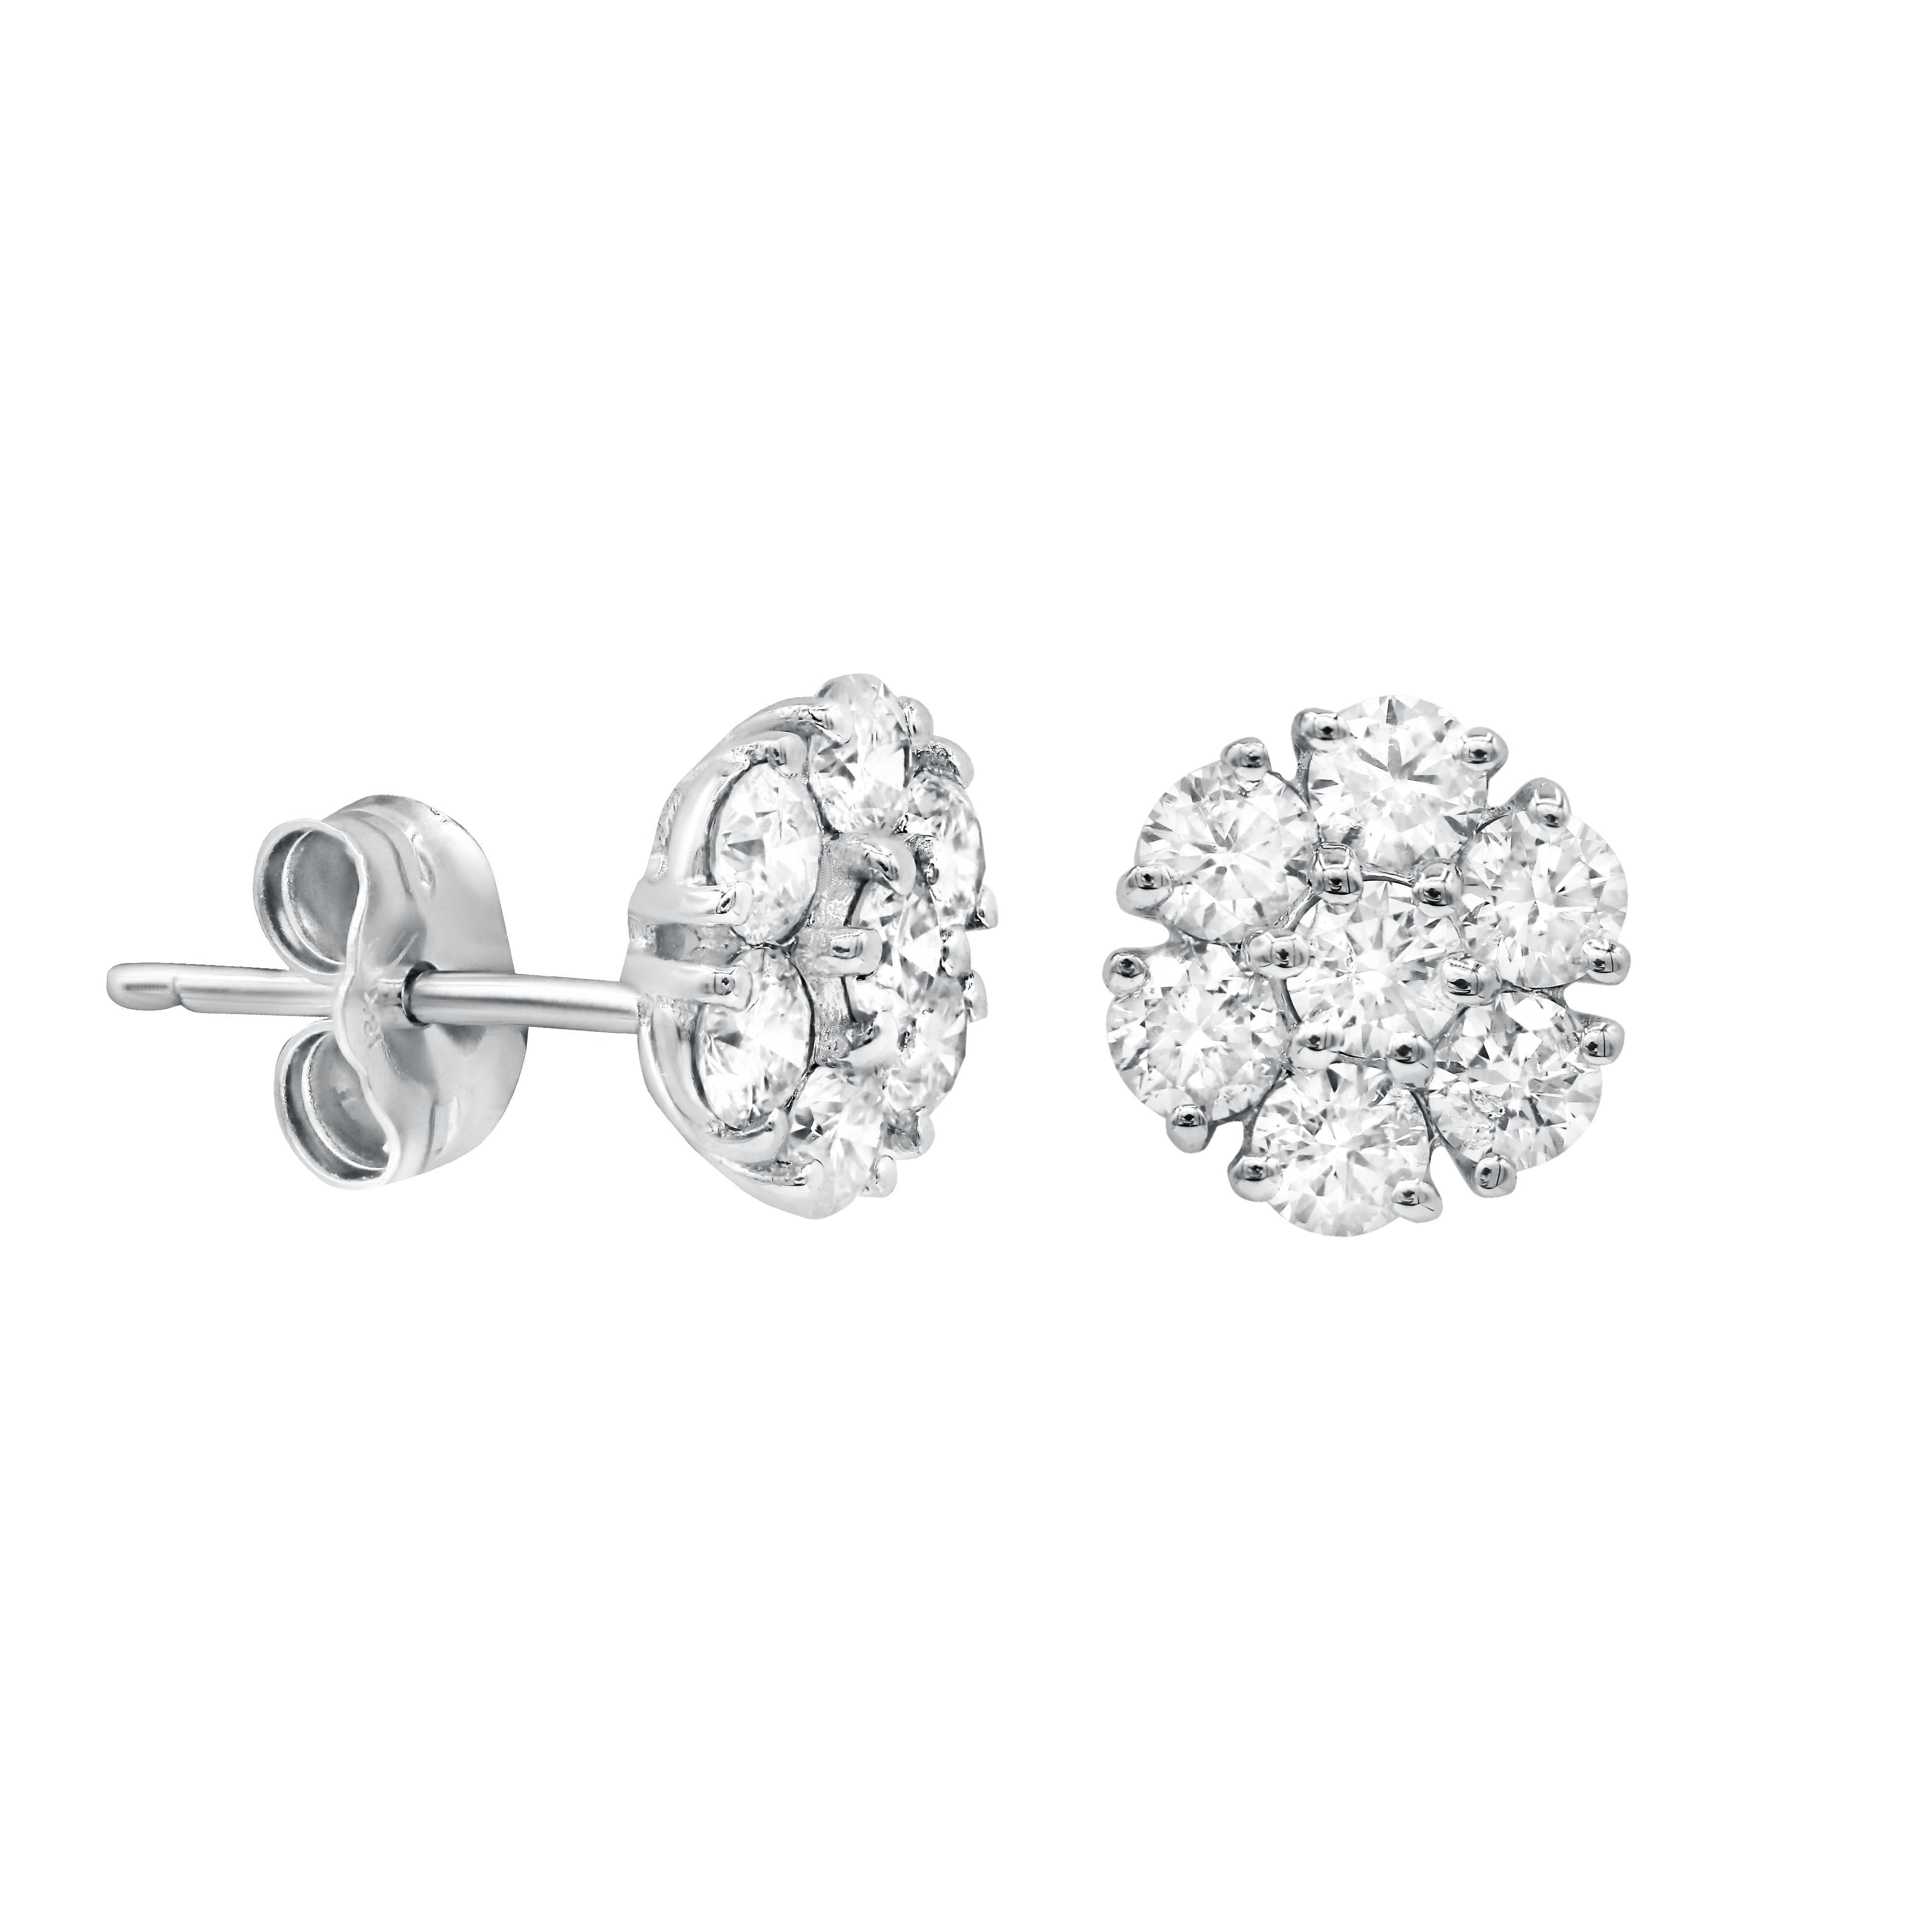 18kt white gold diamond cluster stud earrings containing 1.60 cts tw of round diamonds (FG SI)
Diana M. is a leading supplier of top-quality fine jewelry for over 35 years.
Diana M is one-stop shop for all your jewelry shopping, carrying line of